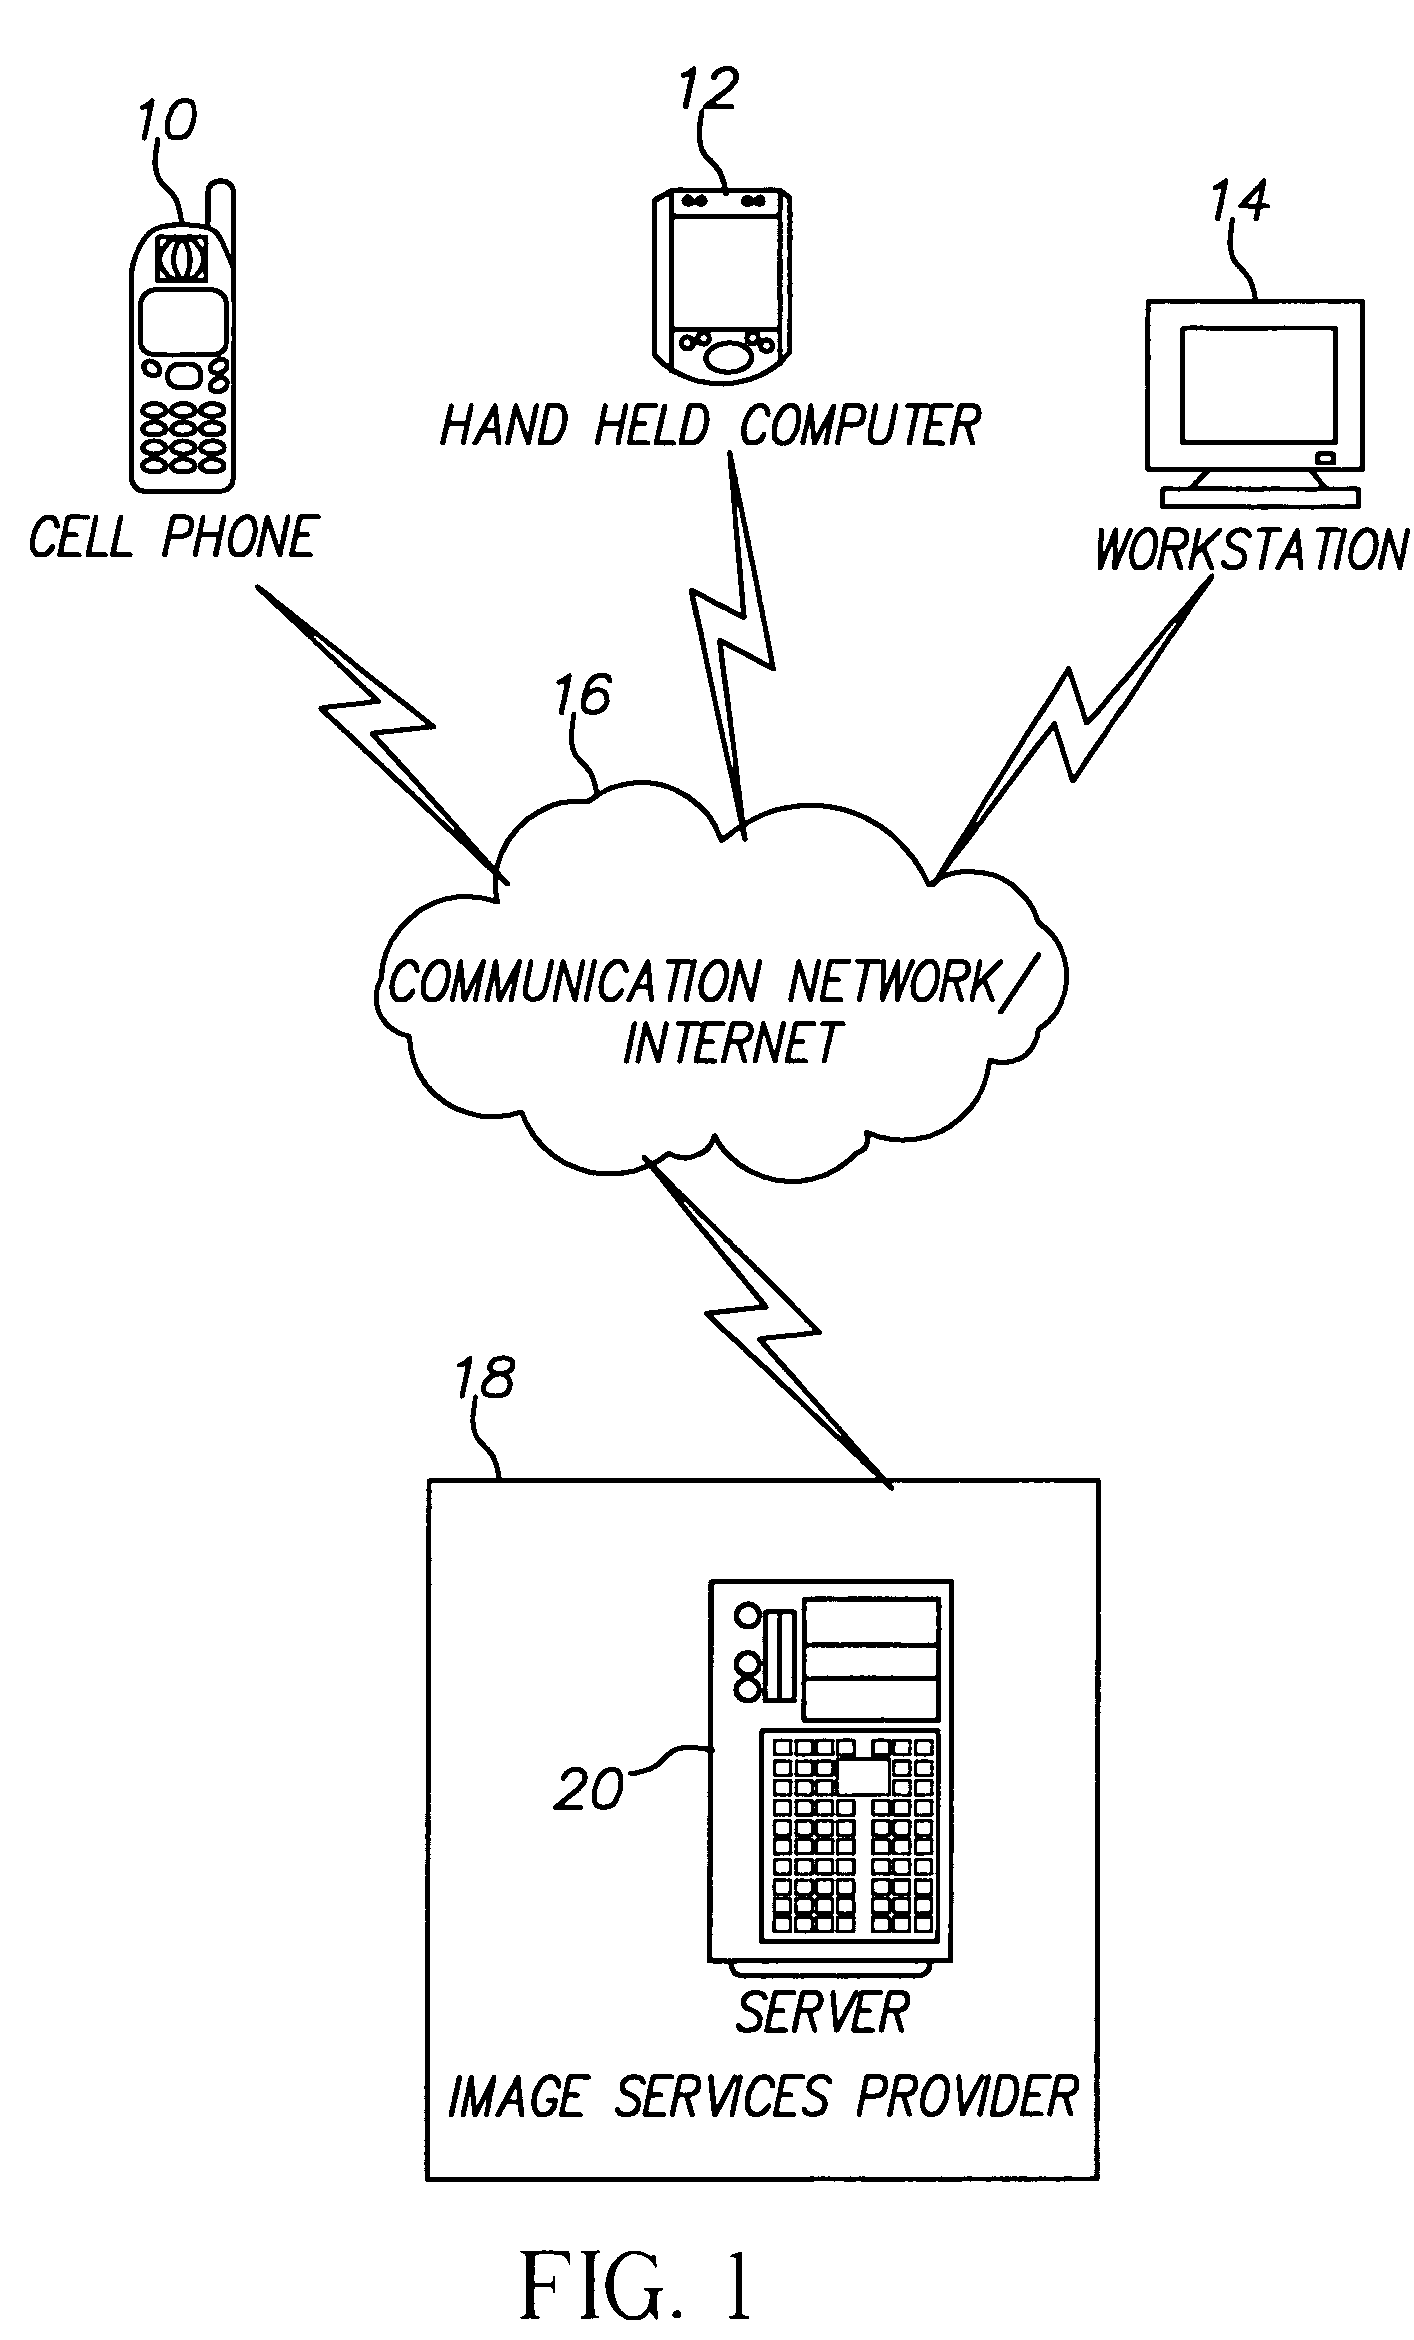 System and method for notification of digital images to be shared via a service provider